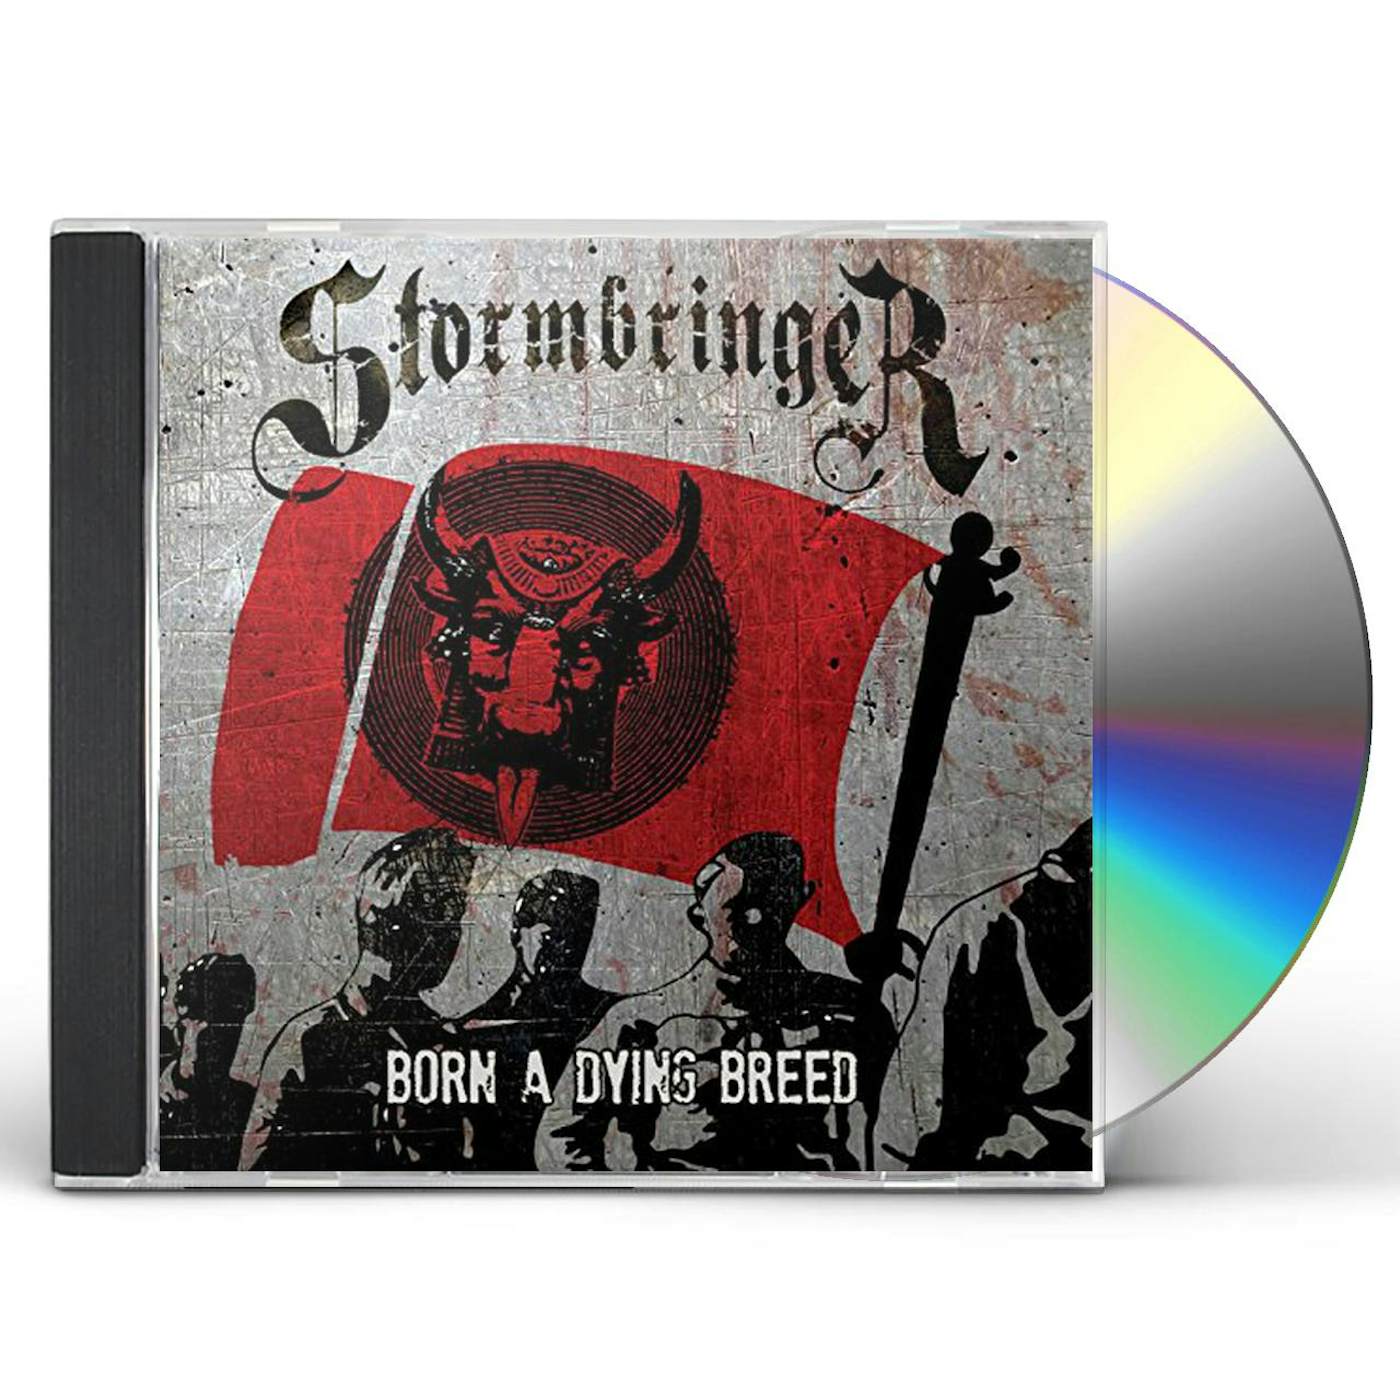 Stormbringer BORN A DYING BREED CD